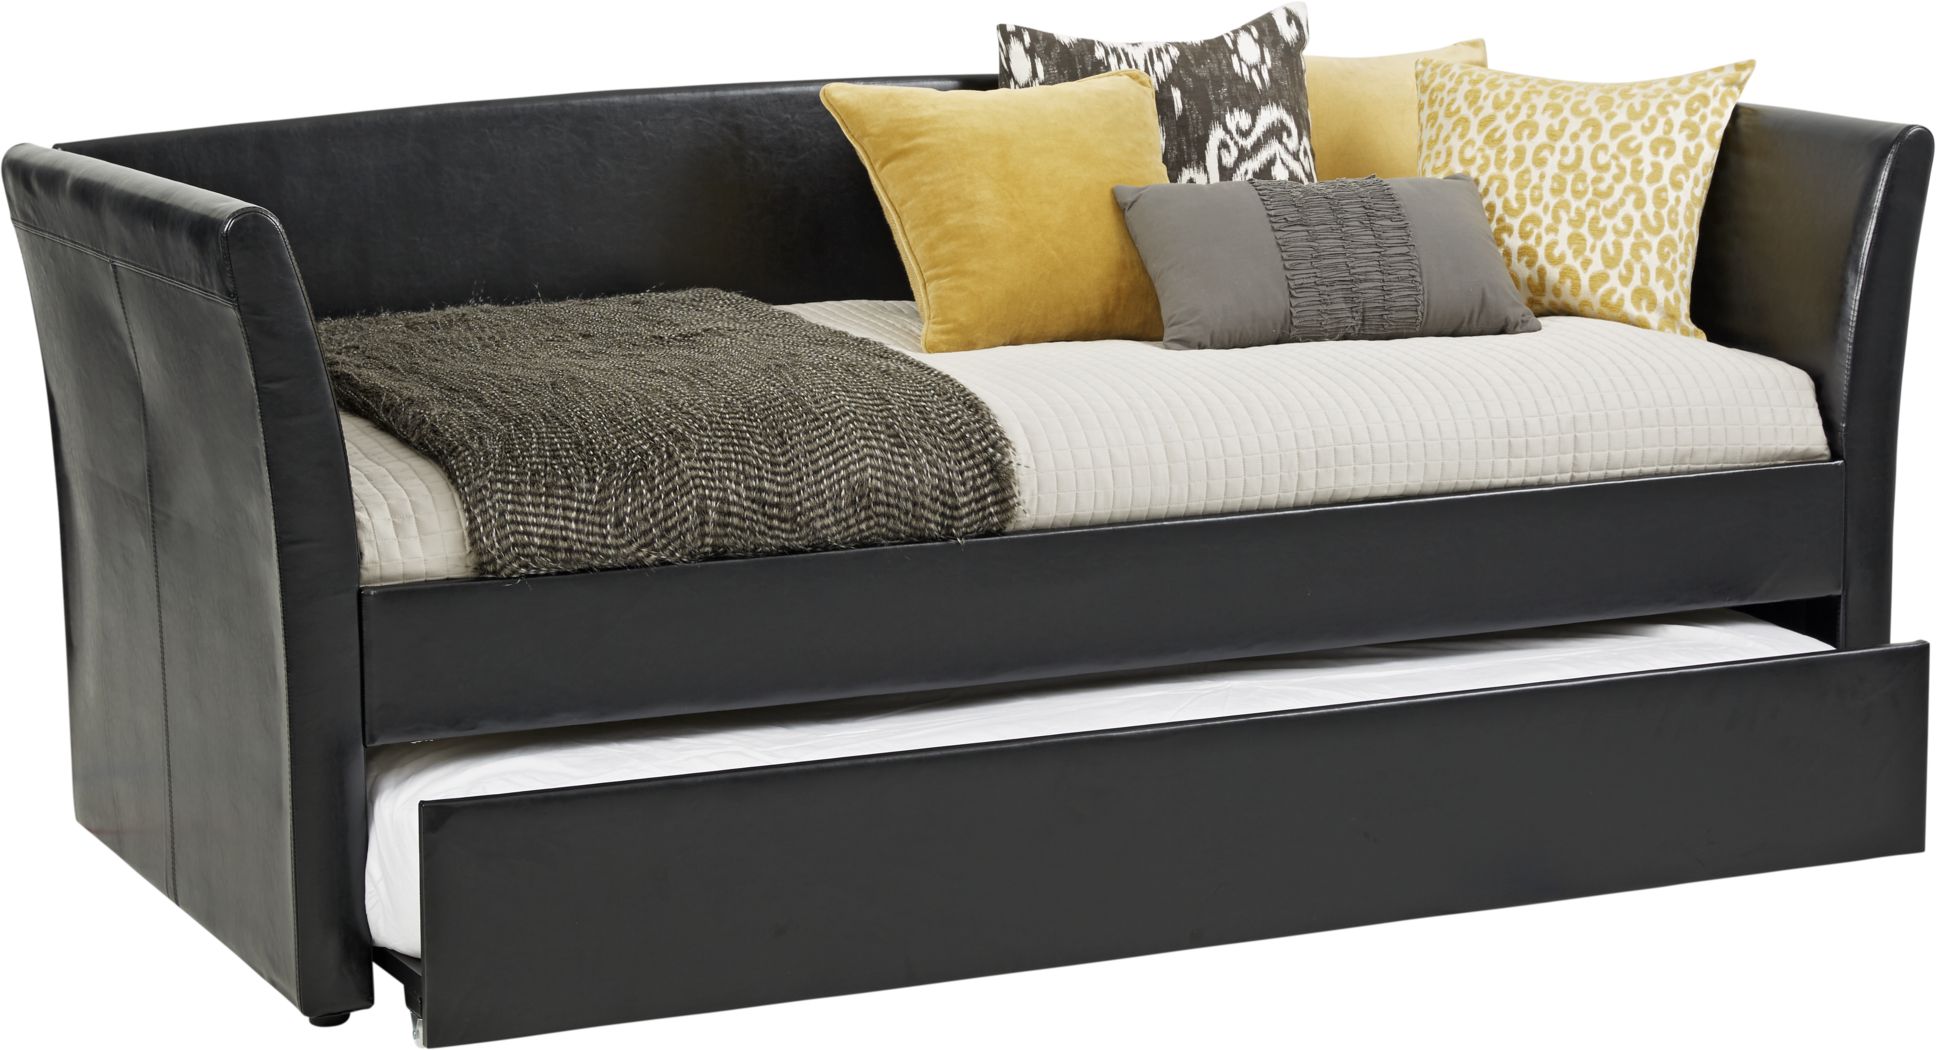 Leather Daybeds With Trundle, Leather Daybed With Trundle